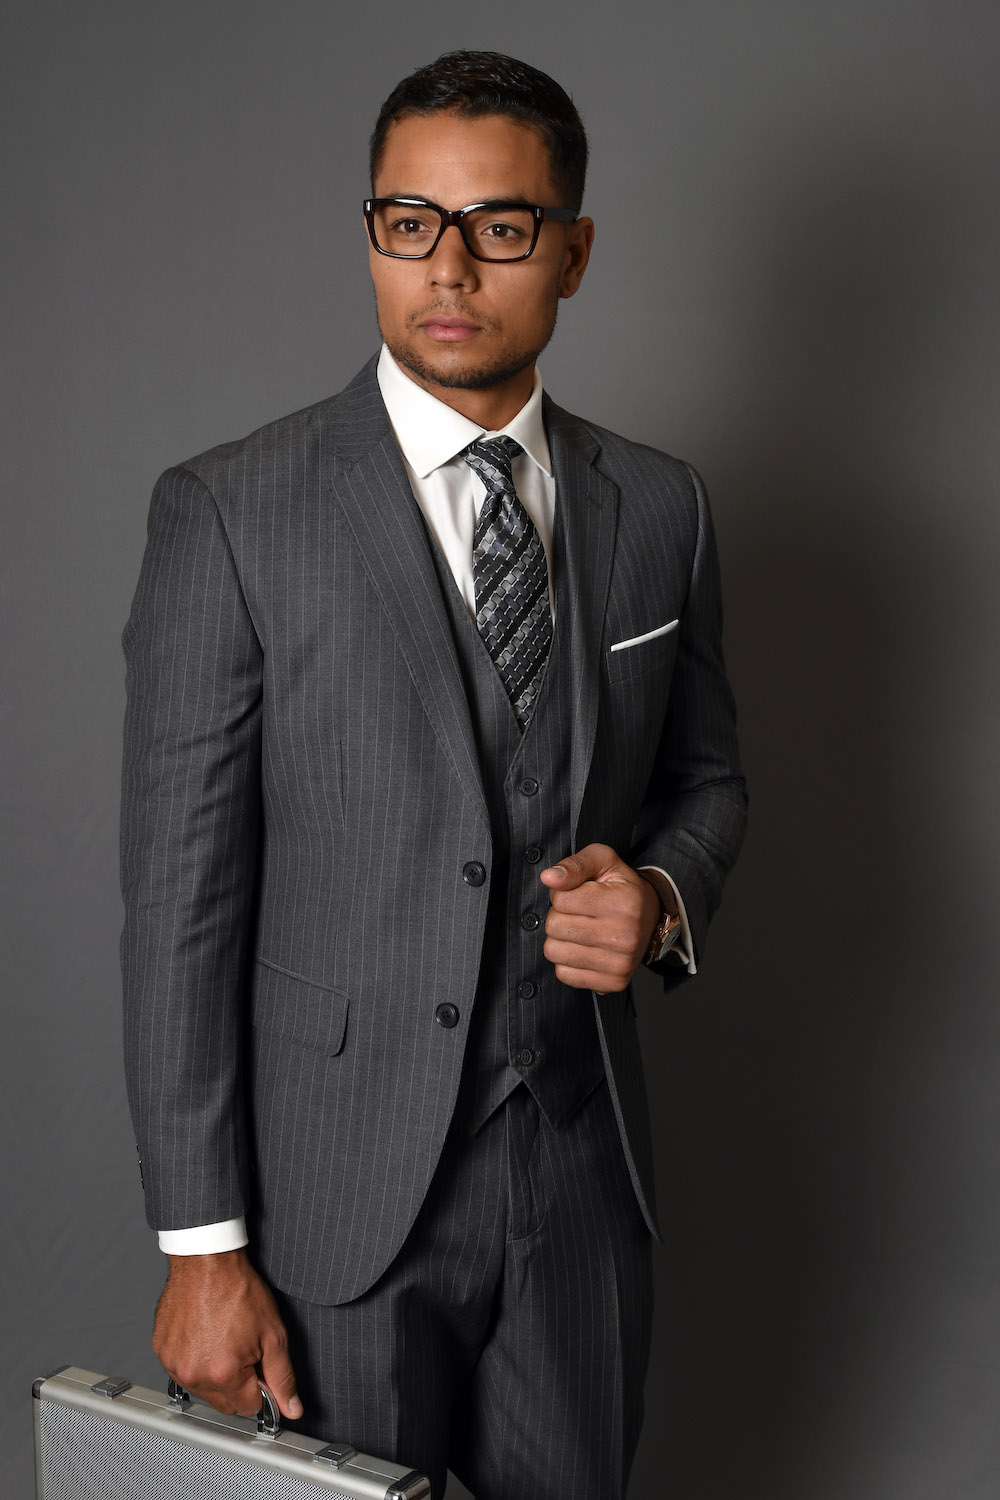 STATEMENT MANTUA-5 CHARCOAL PINSTRIPE, TAILORED FIT SUIT 3PC, WOOL ...